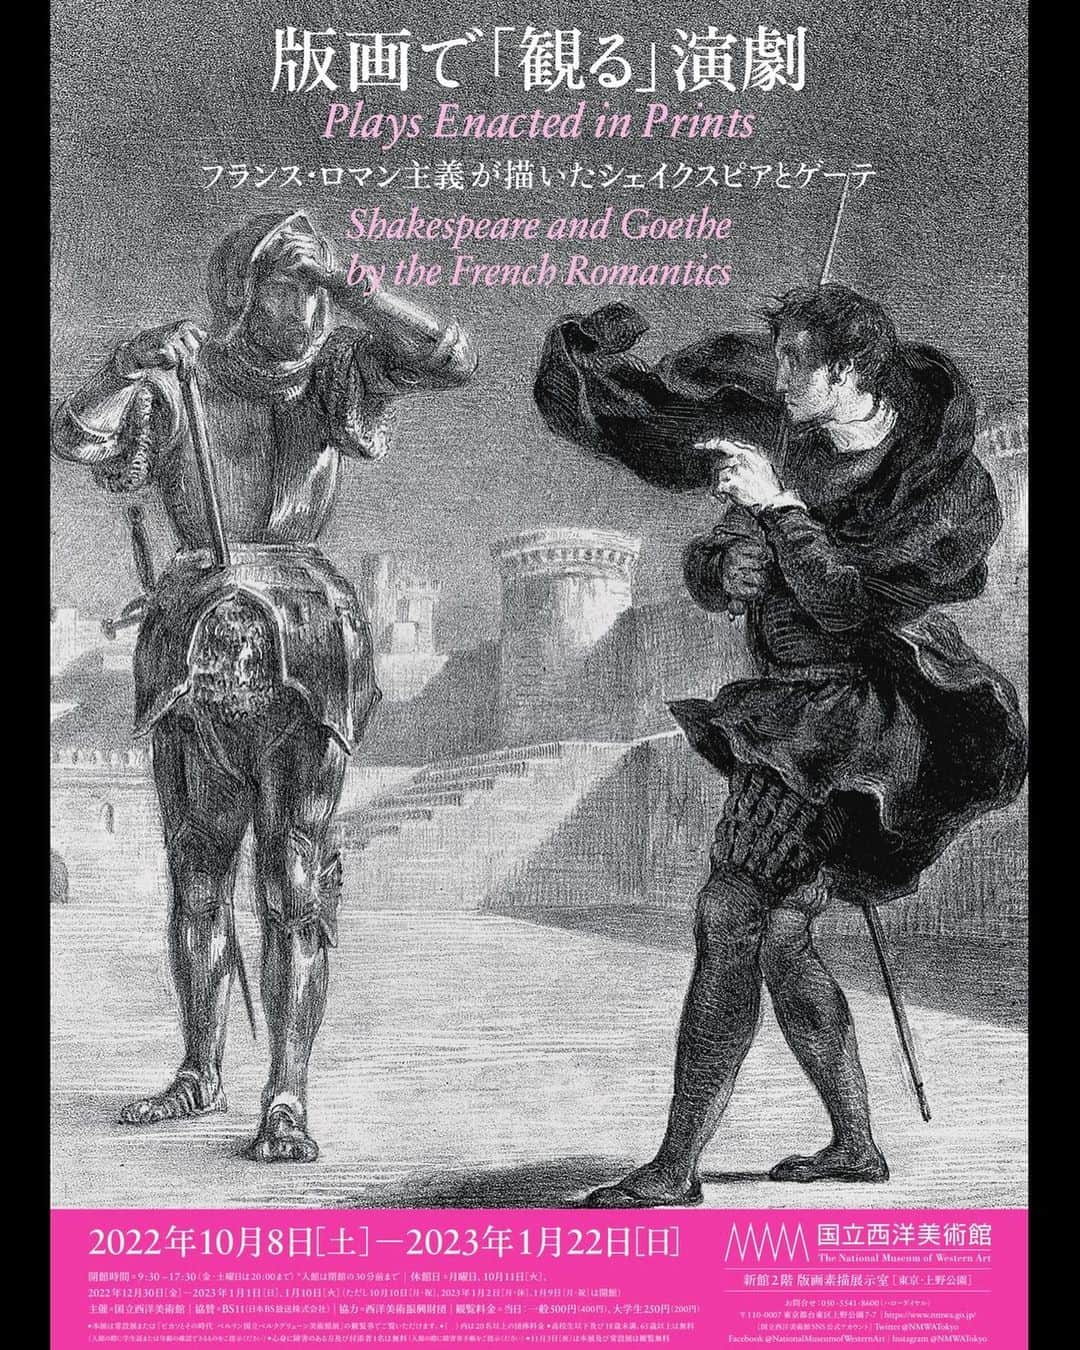 浅野菜緒子のインスタグラム：「My first curated exhibition! I’m thrilled to announce that “Plays Enacted in Print: Shakespeare and Goethe by the French Romantics”, the exhibition I’ve curated for the first time will be held this October at the National Museum of Western Art, Tokyo!   Displaying some of the masterpieces from the Romantic prints including Delacroix’s Faust and Hamlet series as well as Chassériau’s Othello suite, the show will focus on the artists’ own interpretations of the dramatic languages and narratives of Shakespeare and Goethe, and the inspirations possibly drawn from contemporary stage productions and the French translations of the plays.  This will be the first occasion in the museum’s history where these three series are shown together.   Last but not least, we will be also hosting the production of “Hamlet” inspired by Delacroix’s prints, starring a wonderful performers from the Shakespeare Theatre, the renowned company founded by the late Norio Deguchi.   The exhibition will be held from Oct. 8th, 2022 to Jan. 22nd, 2023 in the Prints&Drawings Gallery, NMWA Tokyo. https://www.nmwa.go.jp/jp/exhibitions/2022watch.html  The production of Hamlet will be held on Oct. 21 and Dec. 3 (total 4 performances).  https://www.nmwa.go.jp/jp/experience-learn/detail/event_13.html  初めて企画構成を担当した展覧会が10月から始まります！  ただいま絶賛パネル校正中ですが…ついつい嬉しくなってスポットごとに撮影📸   ドラクロワとシャセリオーというフランス・ロマン主義の逸材たちがシェイクスピア／ゲーテの戯曲に霊感を得て生み出した版画連作を中心に、19世紀当時の舞台表象や各作家の精読などに焦点を当てつつご紹介します。  次回企画展「ピカソとその時代」と同時期開催、企画展チケット／常設展チケット(なんと500円)でご覧いただけます。小企画展でさっくりお仕事帰りや動物園帰りに見れる規模なので、ぜひお越しください！  そして関連イベントとして演劇パフォーマンスも開催します🎭そちらもぜひ！  📜ポスターチラシのデザインは木村稔将さん。綺麗なスキャパレリピンクが嬉しいです🫶」